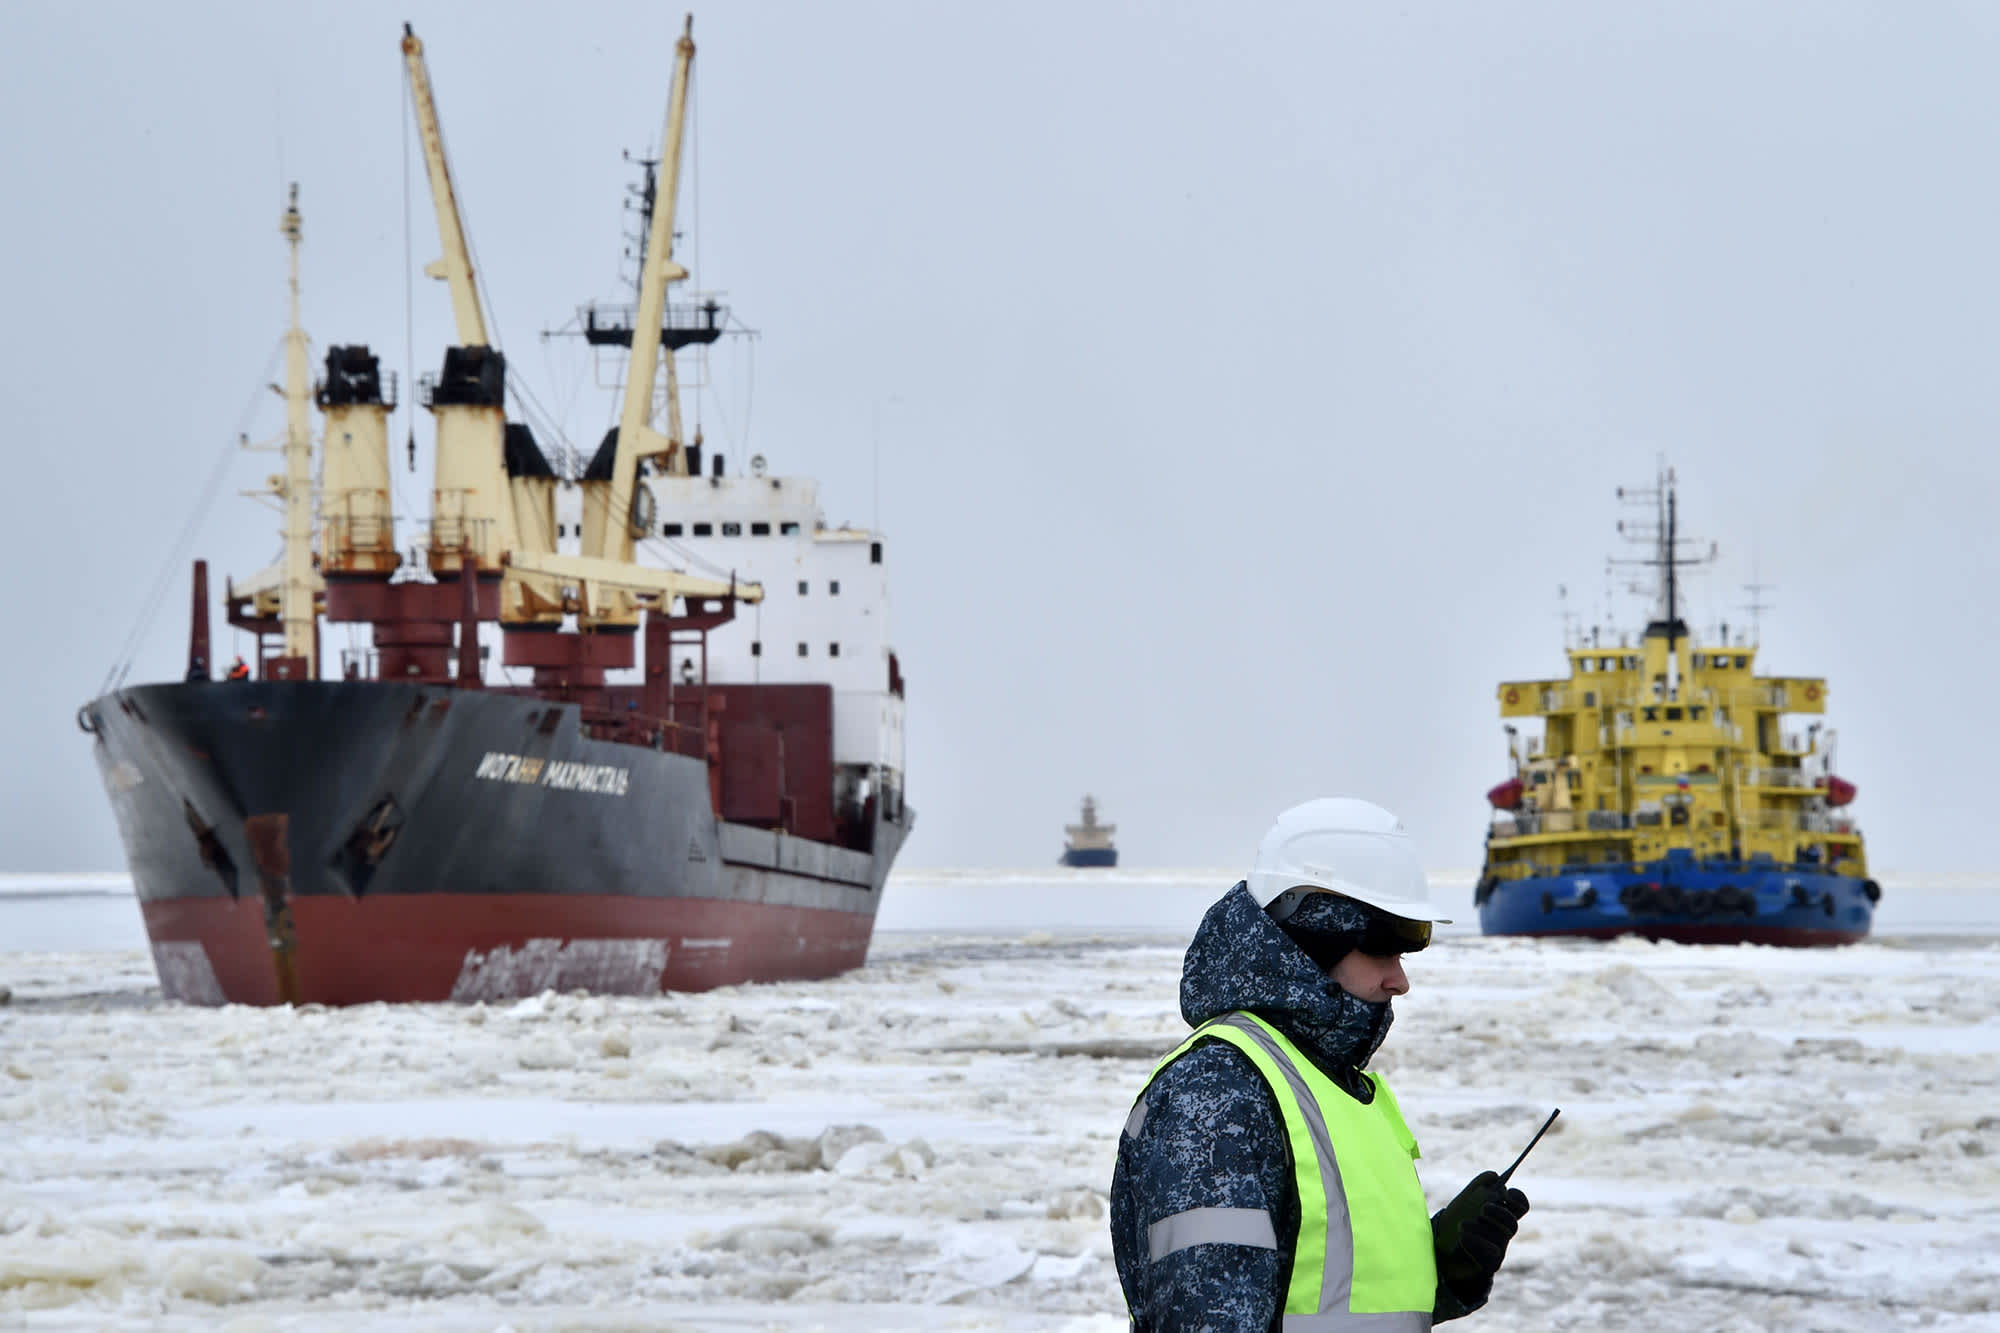 Arctic summers could be ice-free by 2035, enabling faster shipping